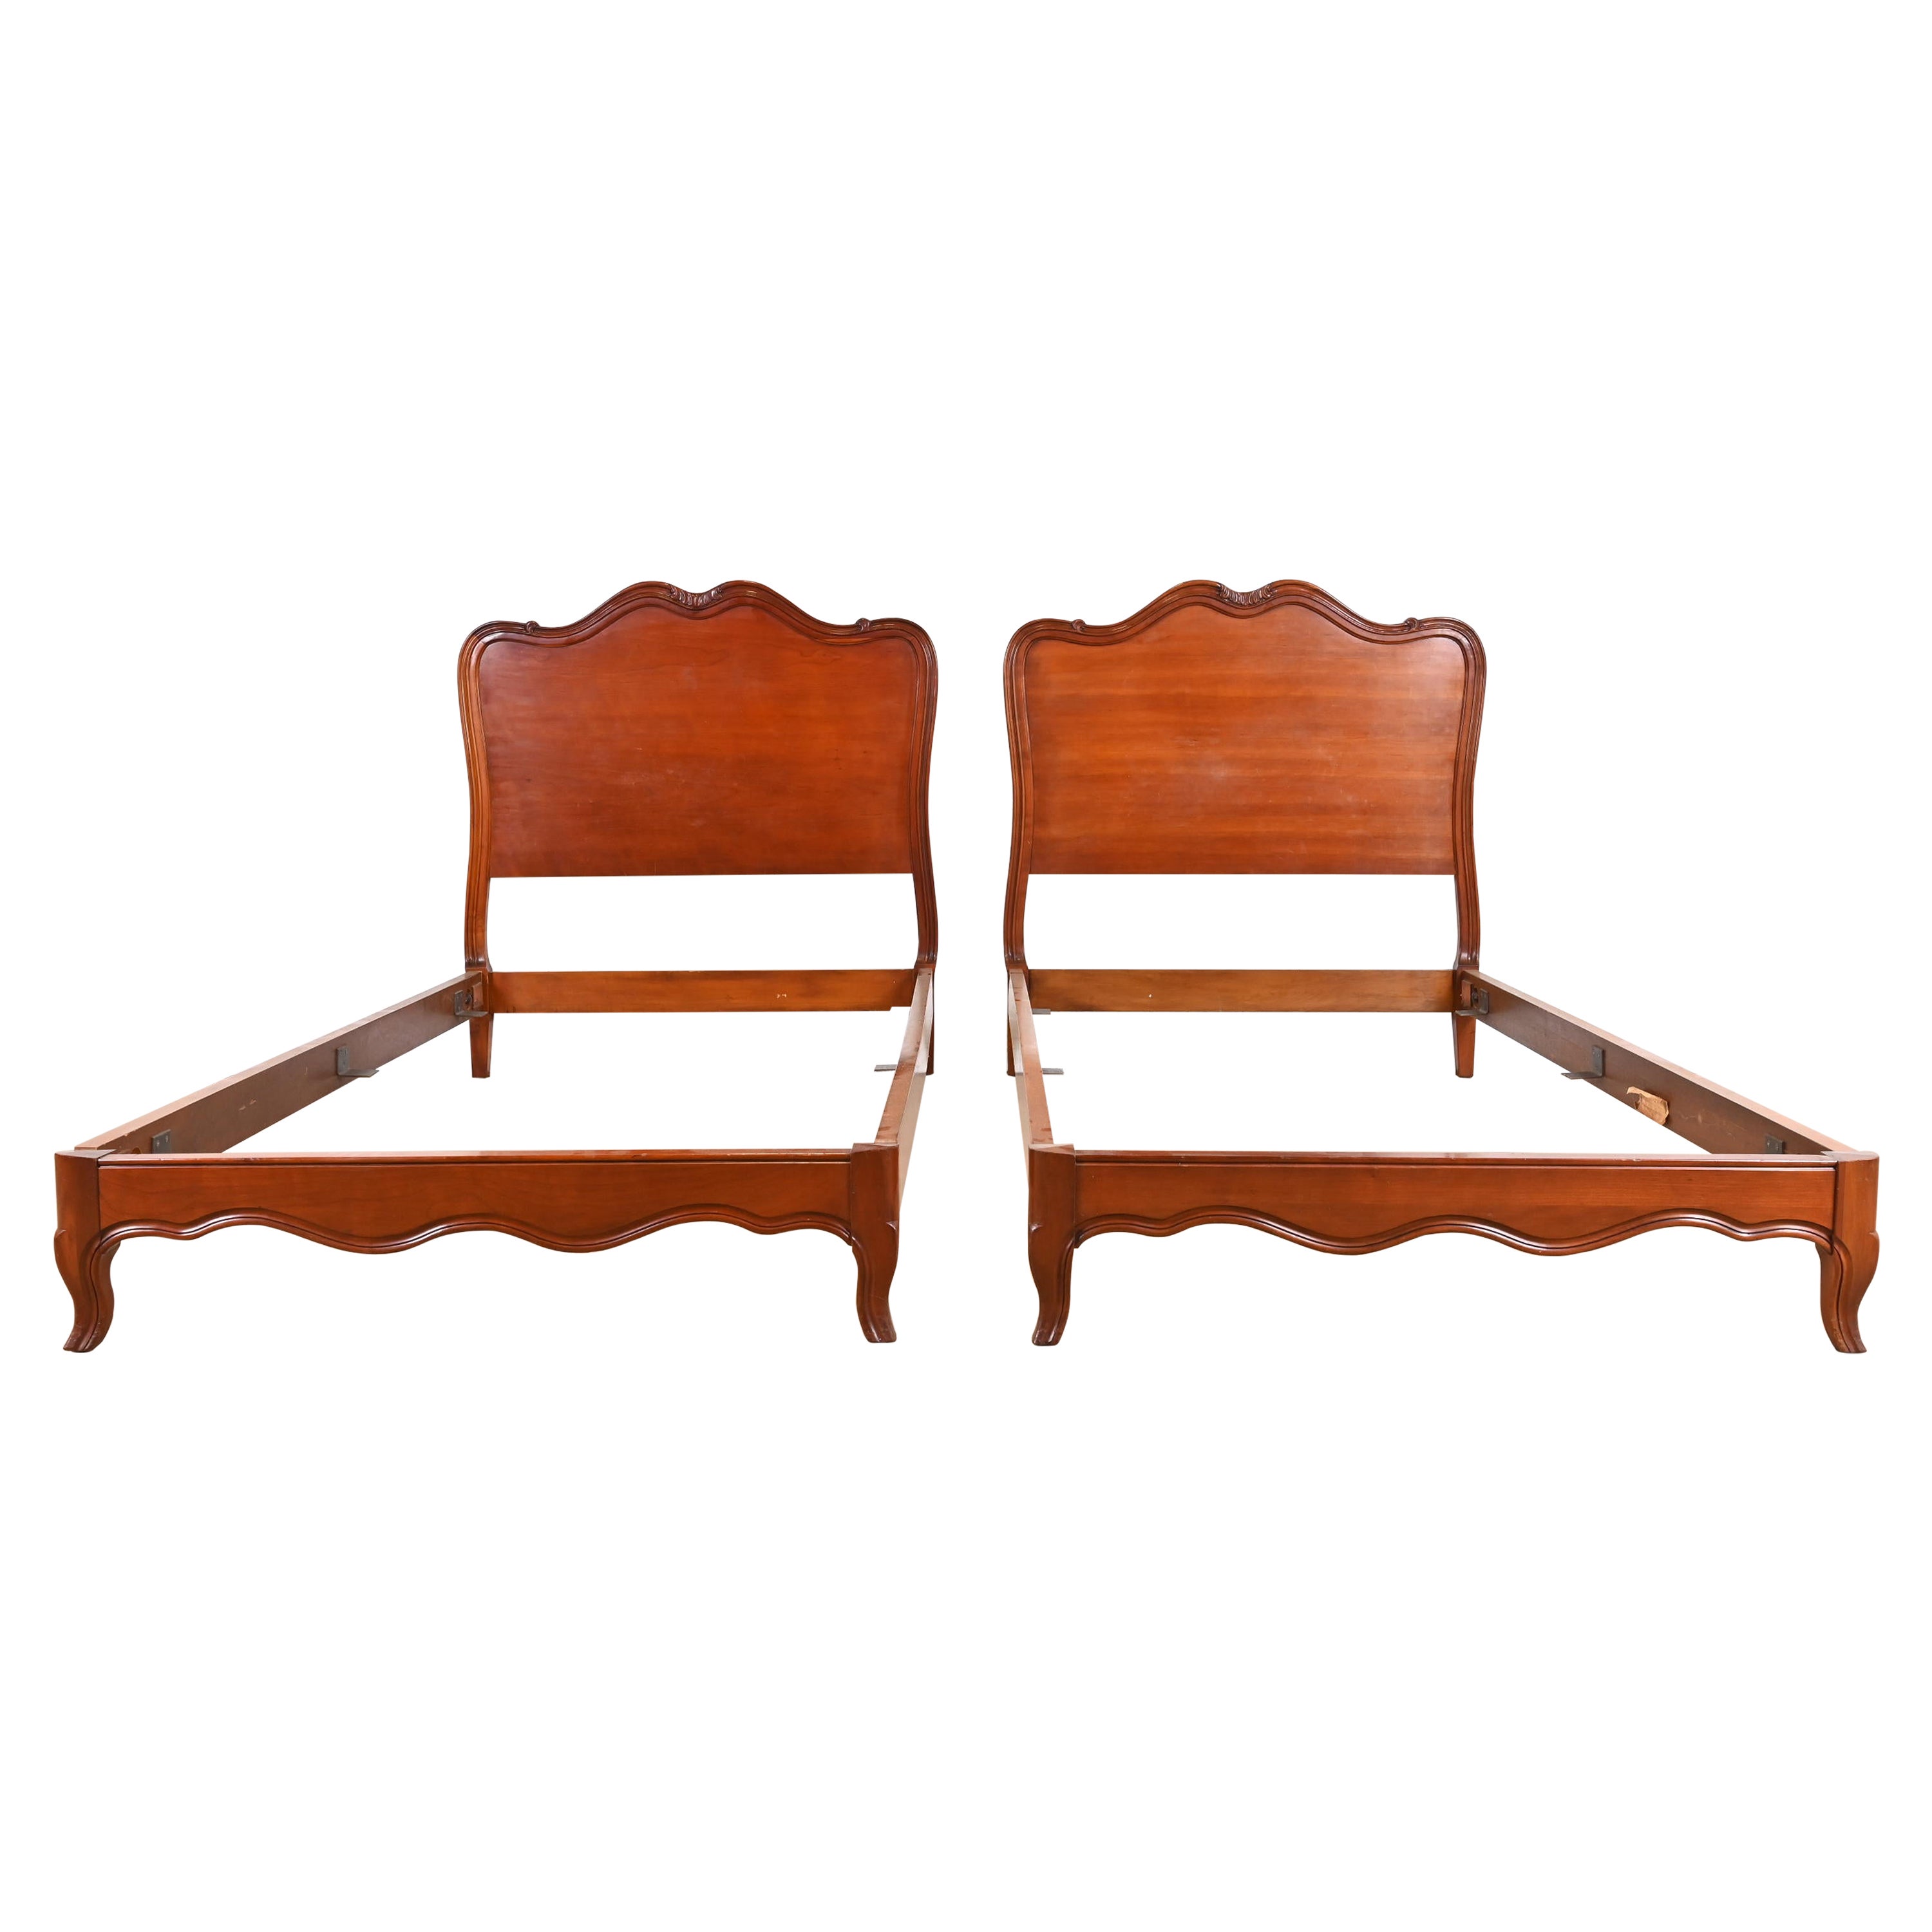 John Widdicomb French Provincial Louis XV Carved Cherry Wood Twin Beds, Pair